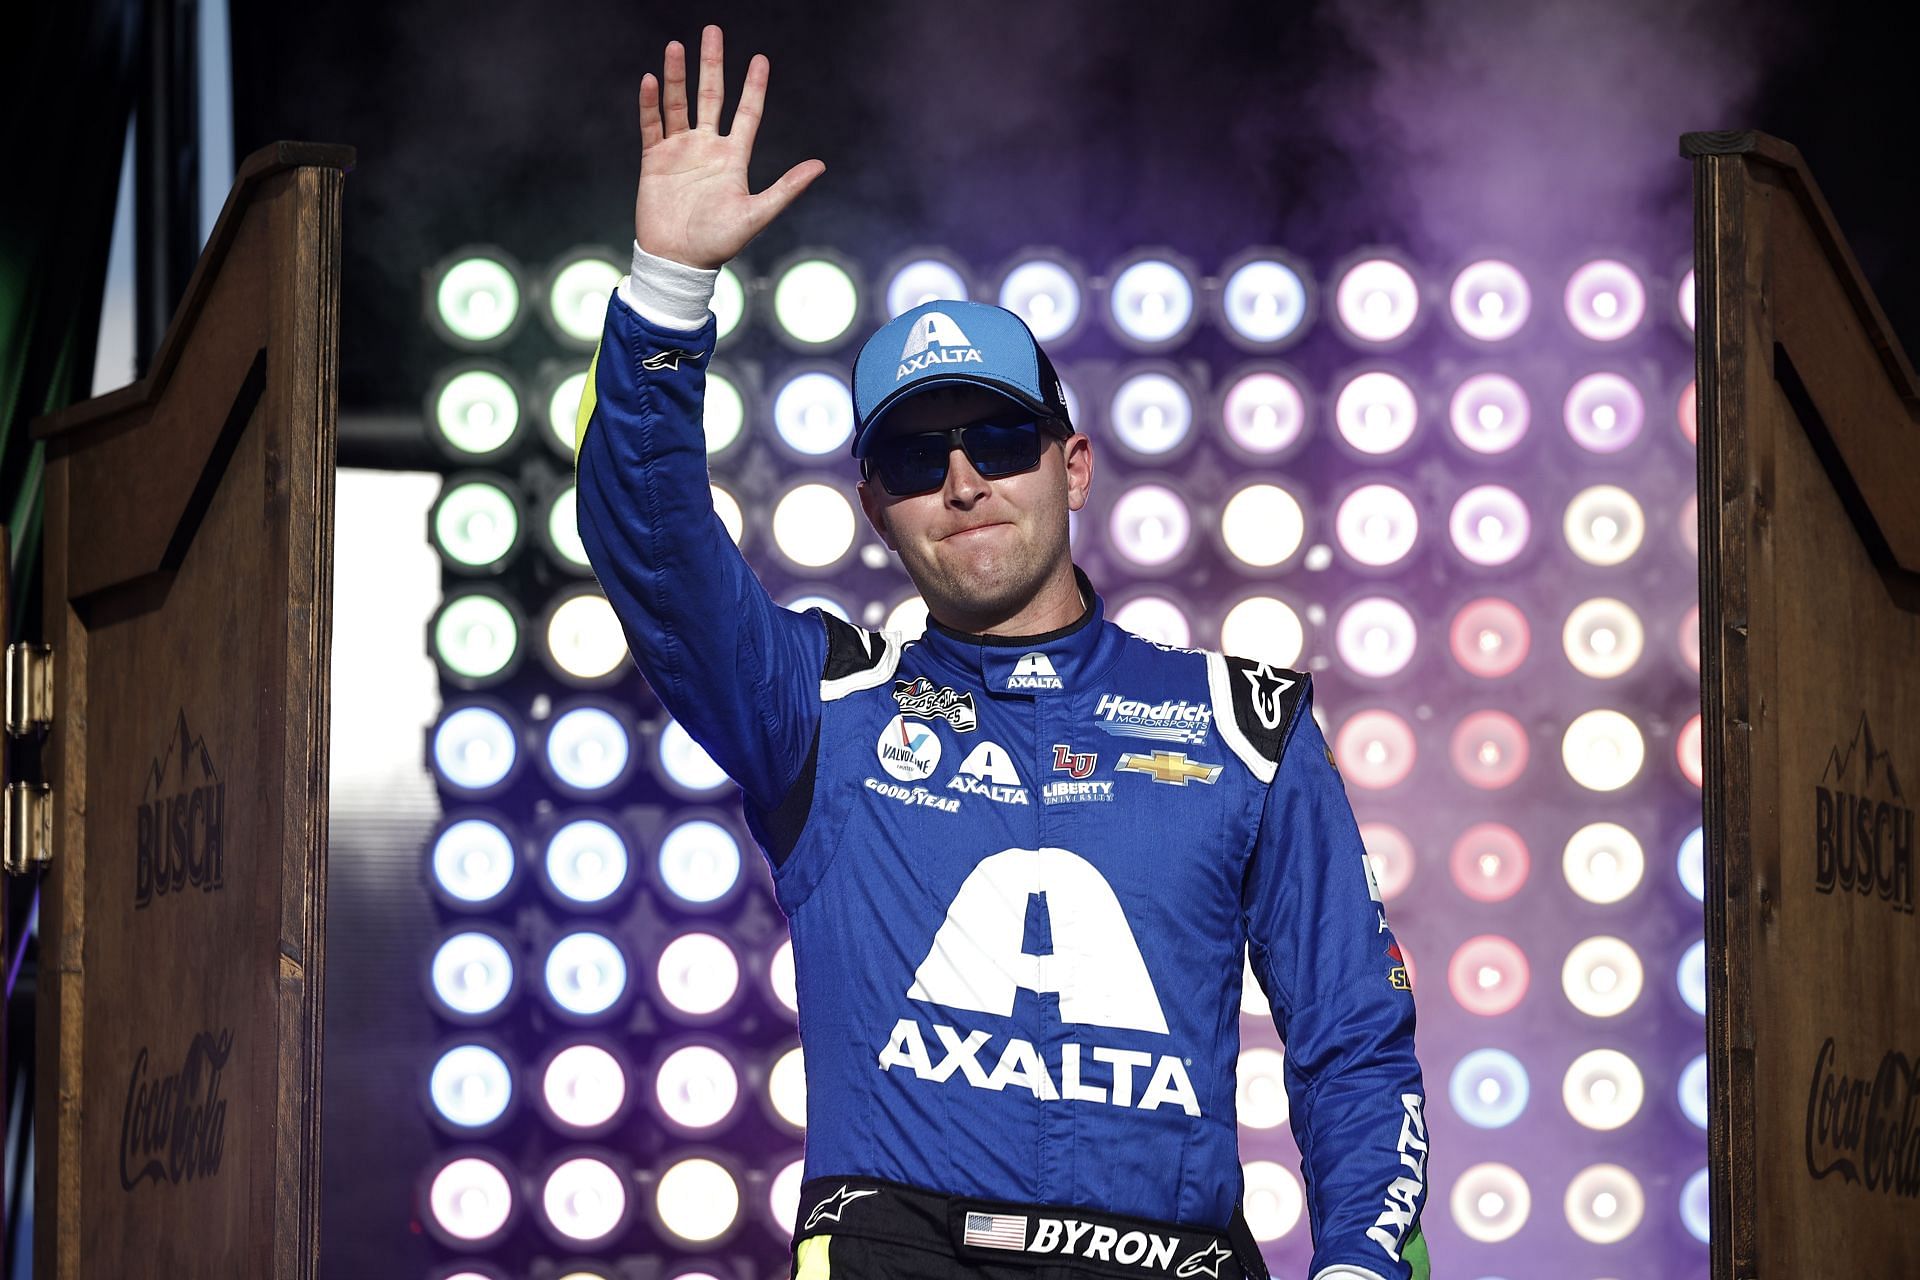 William Byron at the driver intros before the NASCAR All-Star Race at Texas Motor Speedway in 2021. (Photo by Chris Graythen/Getty Images)